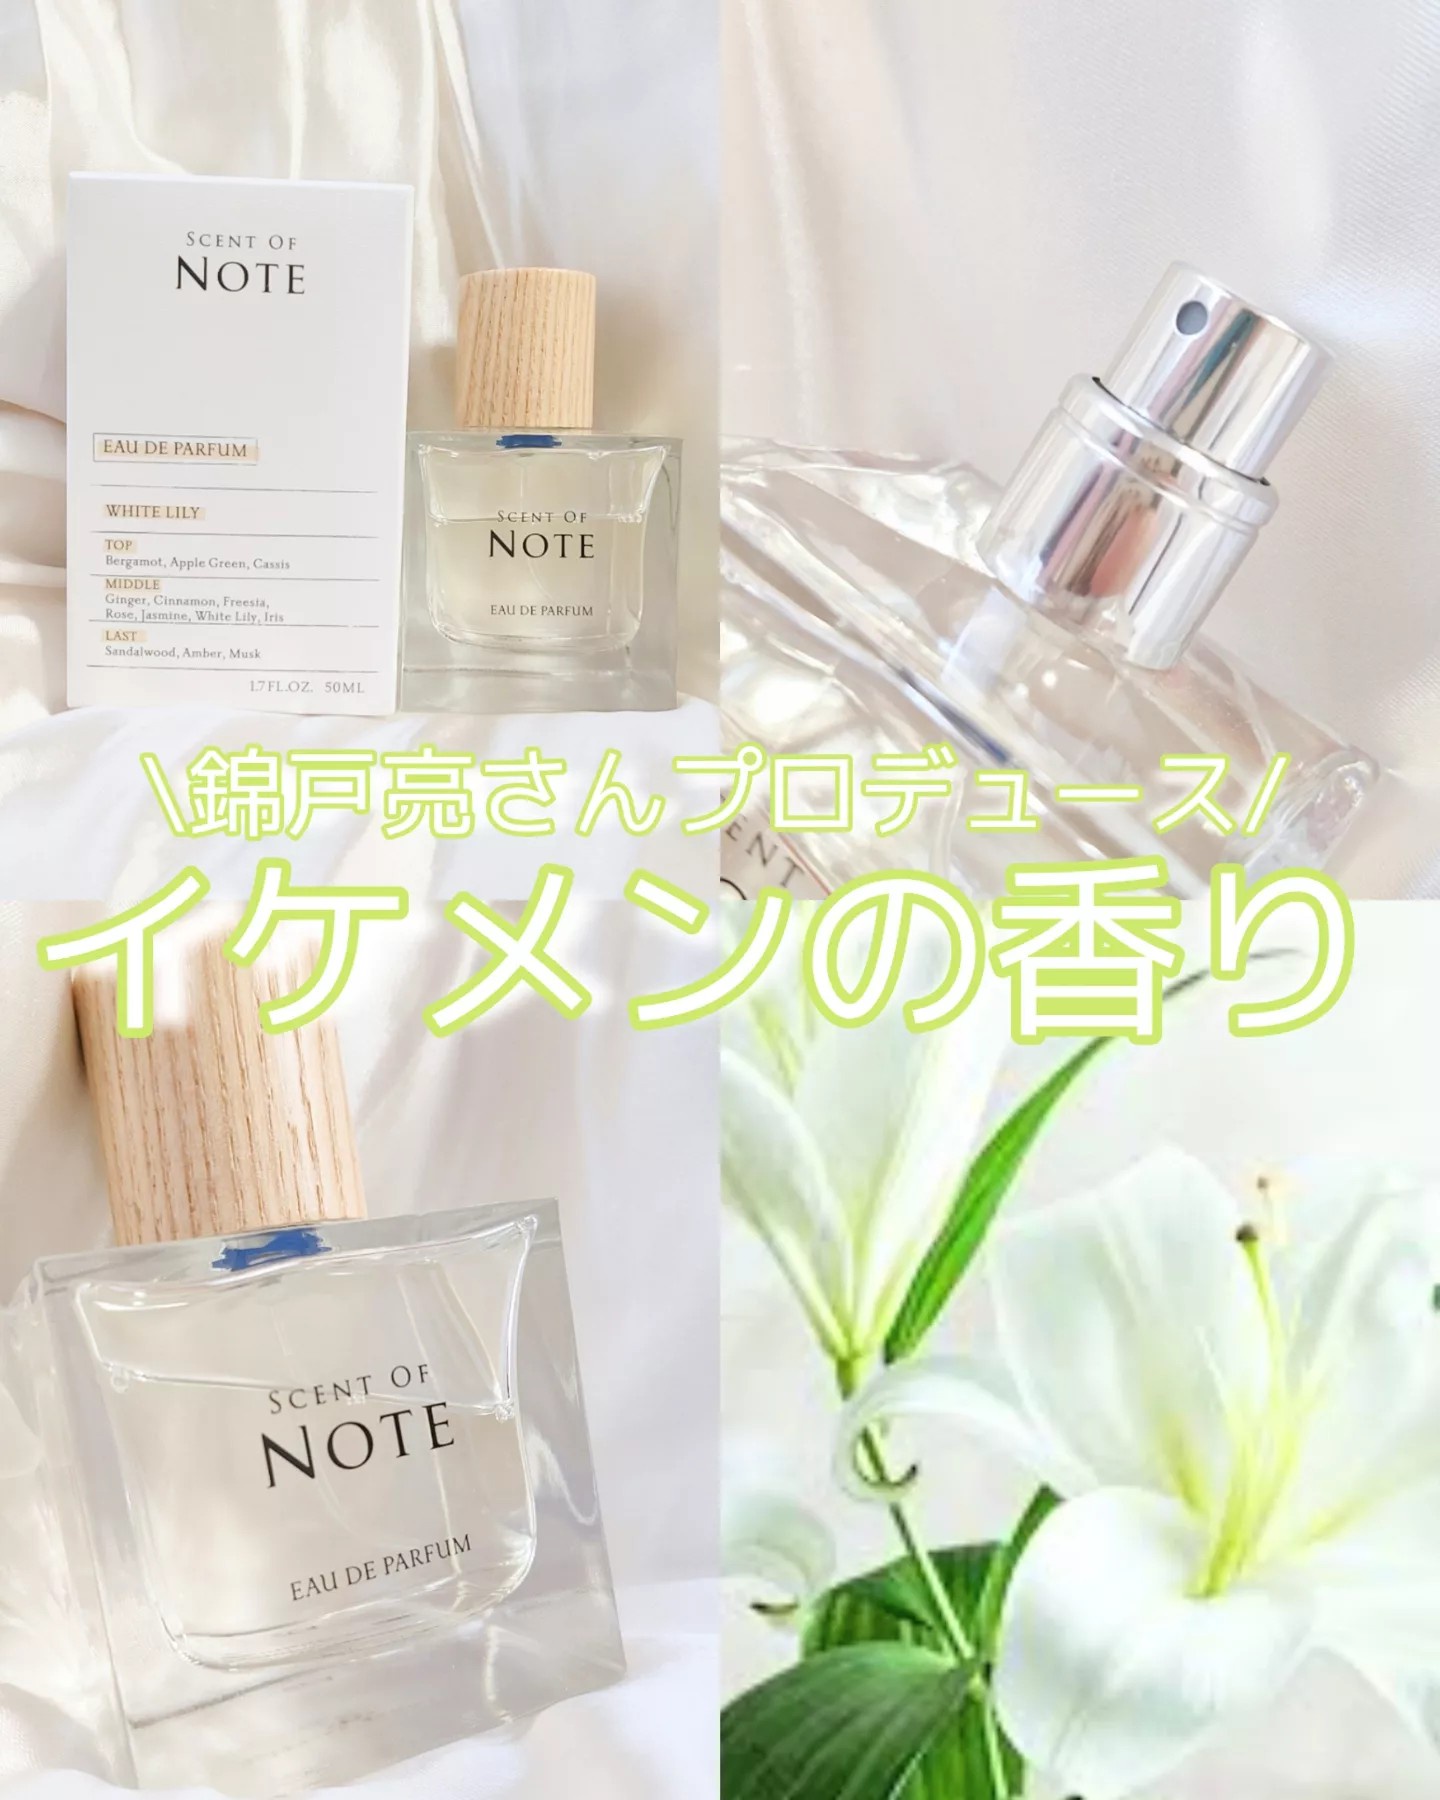 SCENT OF NOTE / SCENT OF NOTEオードパルファムの口コミ写真（by